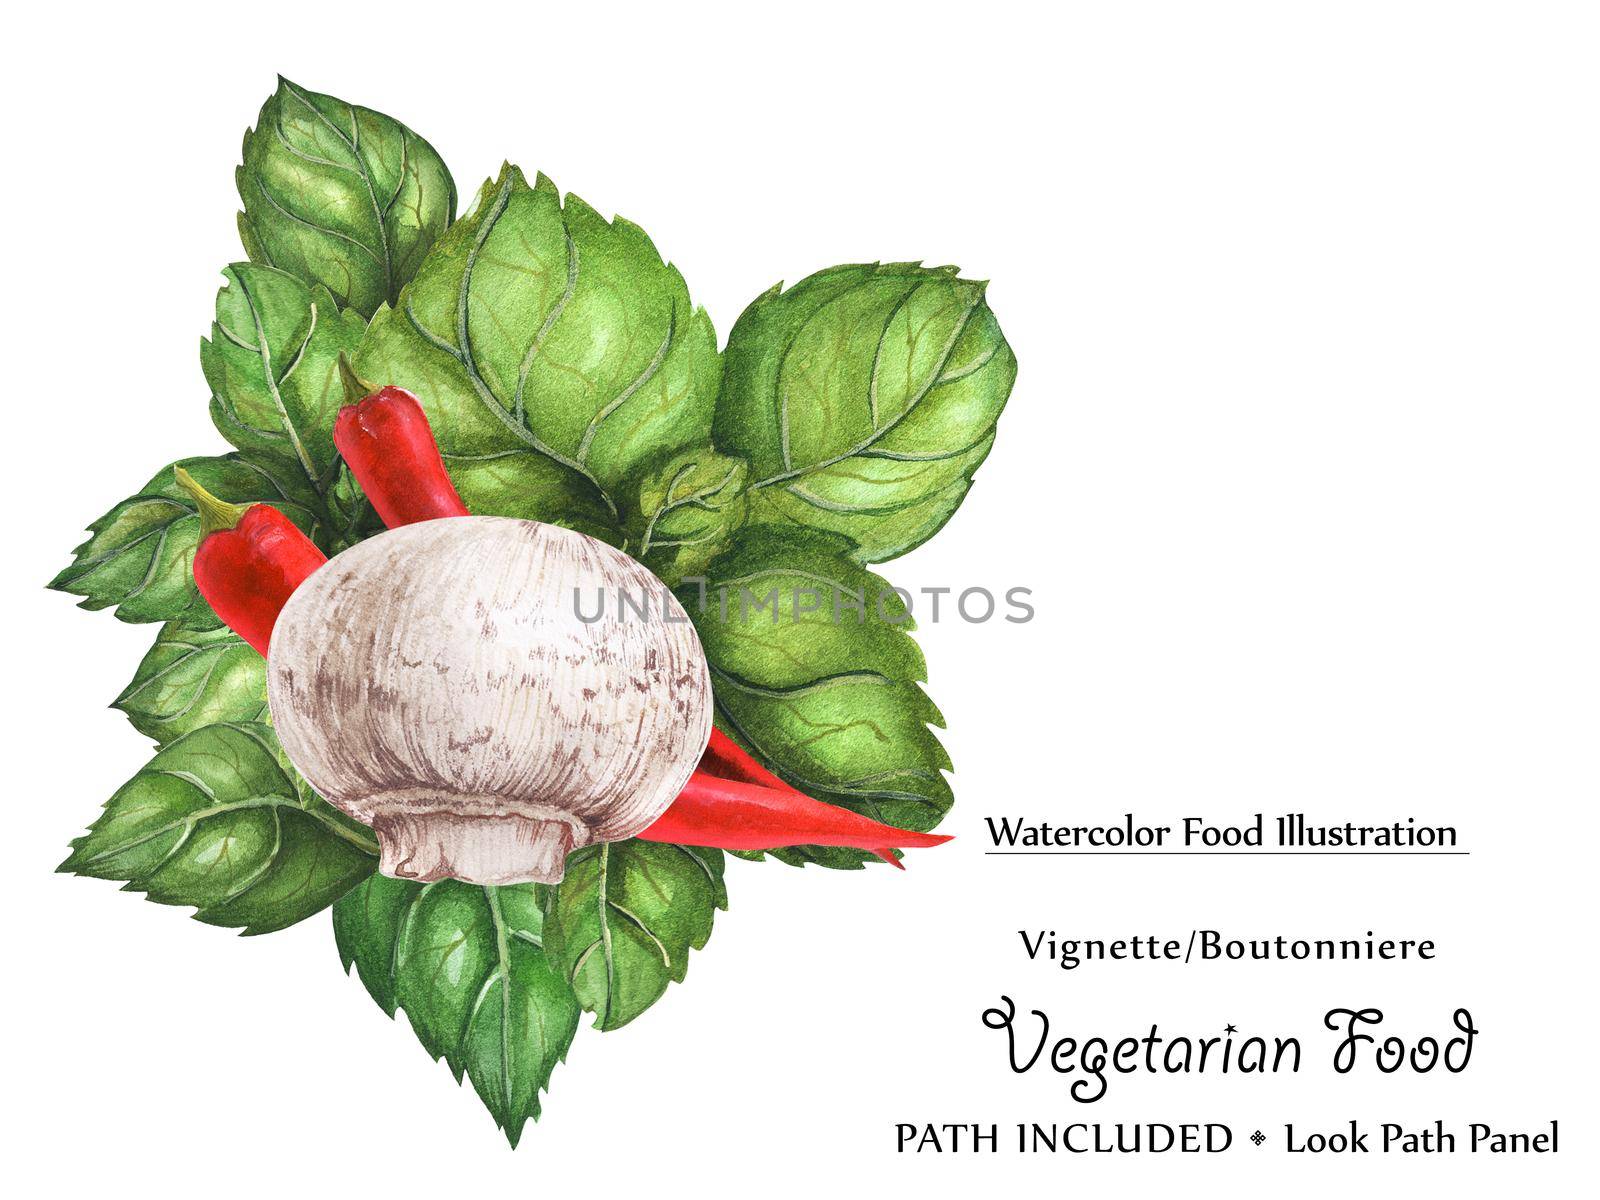 Watercolor vegan vignette biutonniere by freshness green basil leaves, chili peppers and champignon. Isolated, clipping path included, vegan design